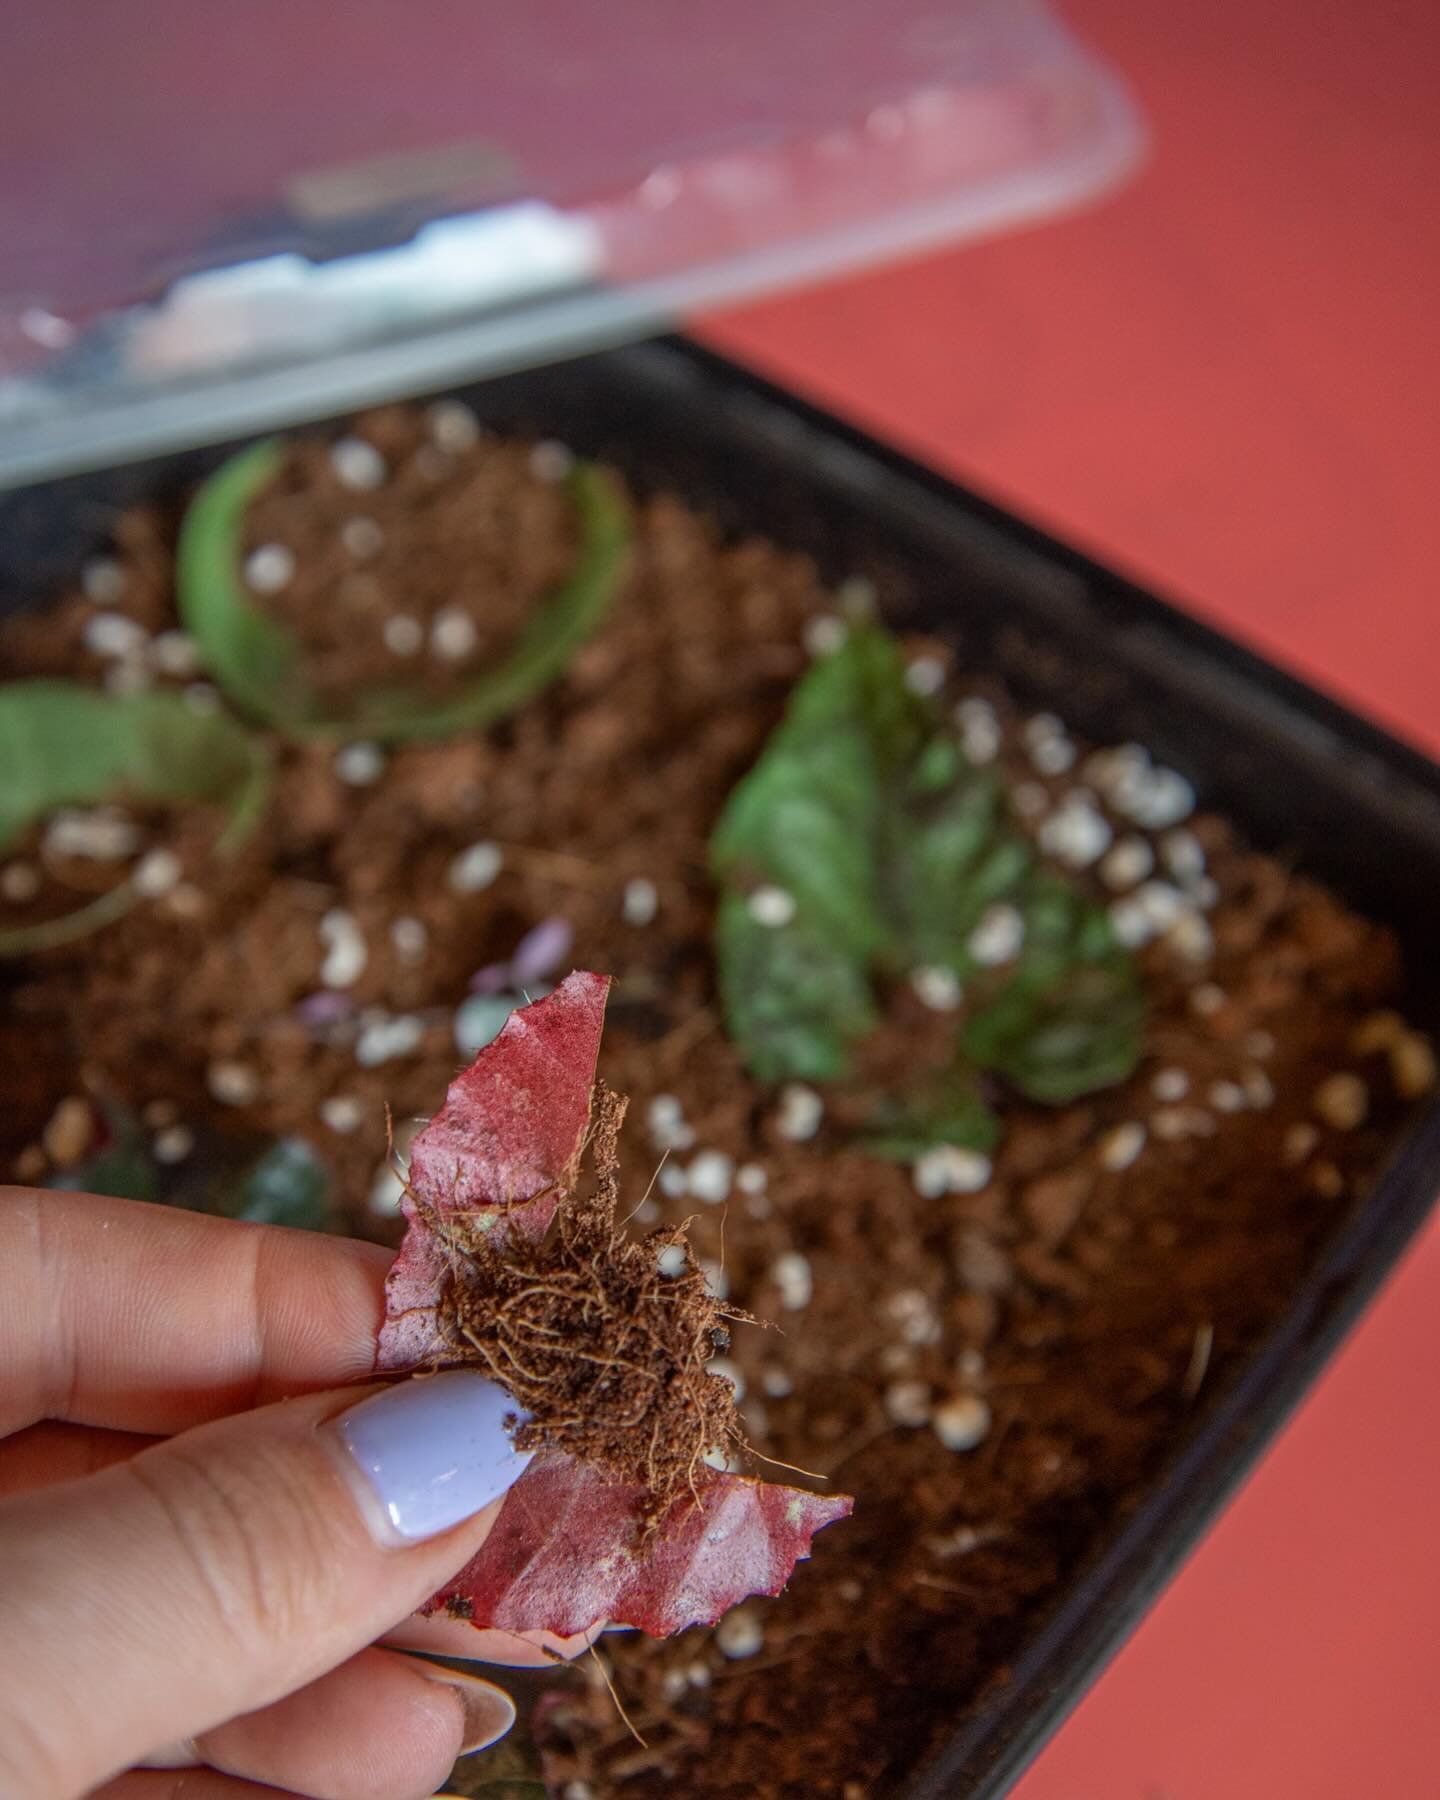 Curious about propagation? 

Pick up your own cutting any time from our Prop Wall ($2 each!) OR join us for our next Propagation Workshop June 20th! We&rsquo;ll learn all about several prop methods, and guests will leave with their own cuttings to nu